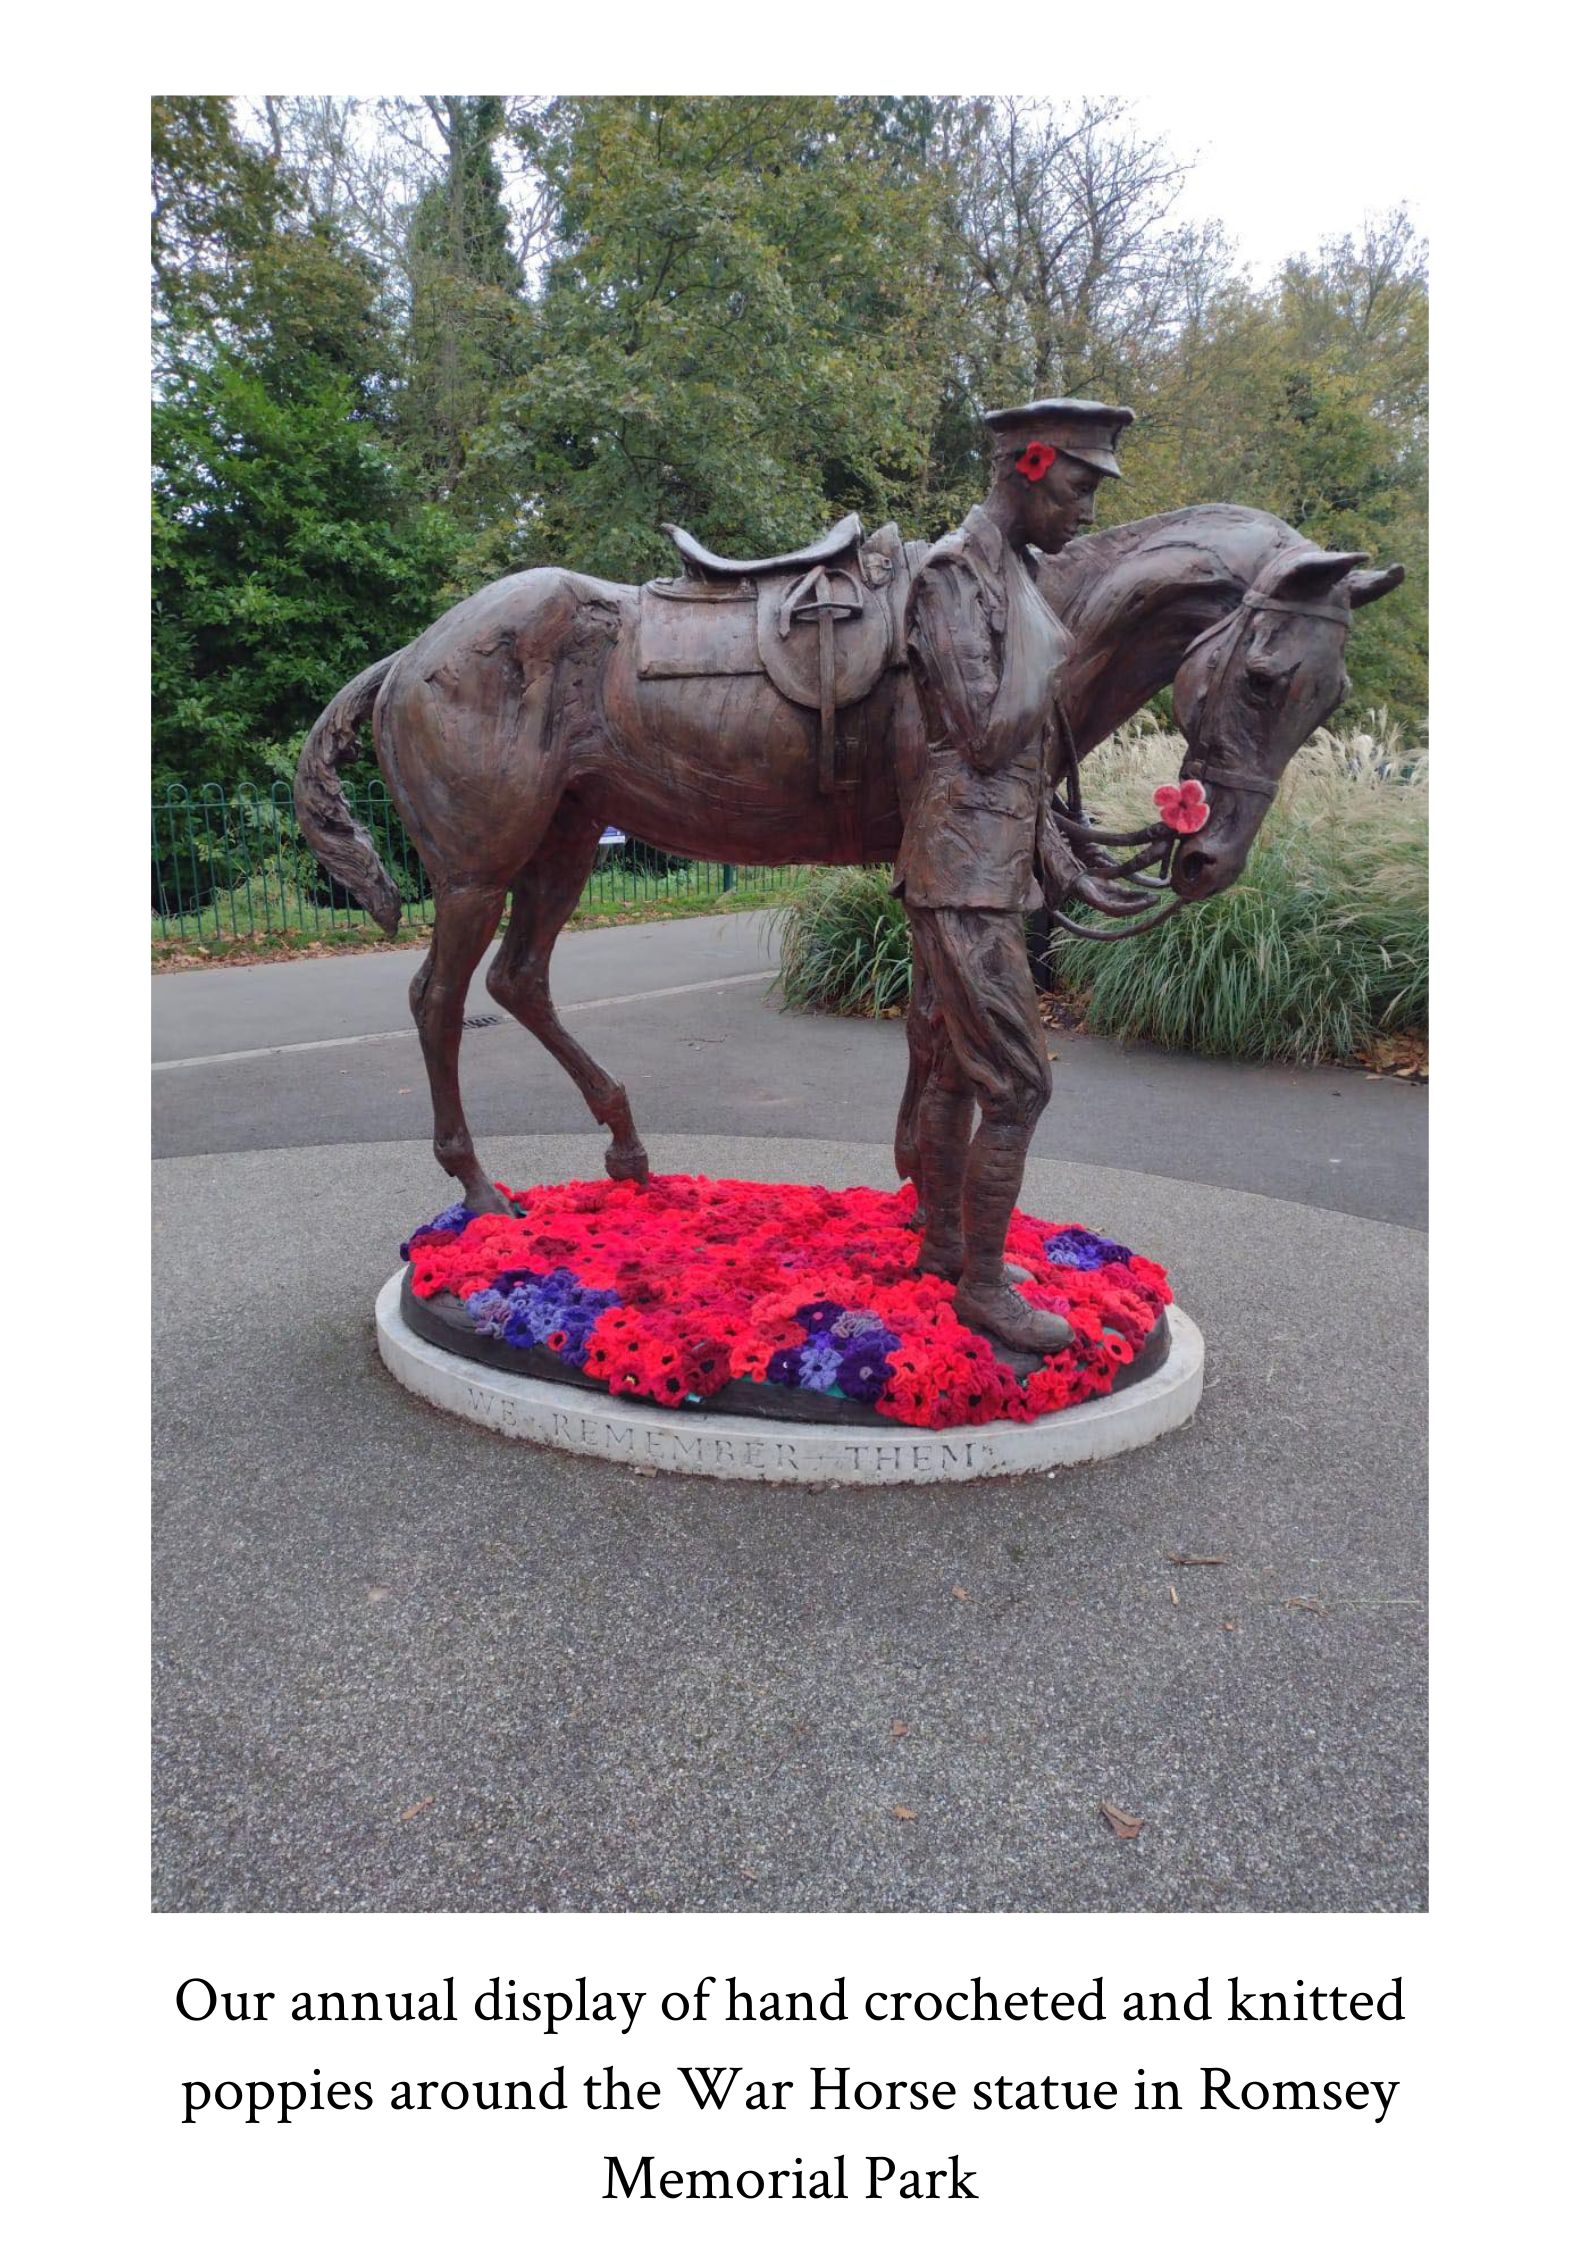 War Horse Statue in Romsey Memorial Park with handmade poppies by Abbotswood Romsey WI